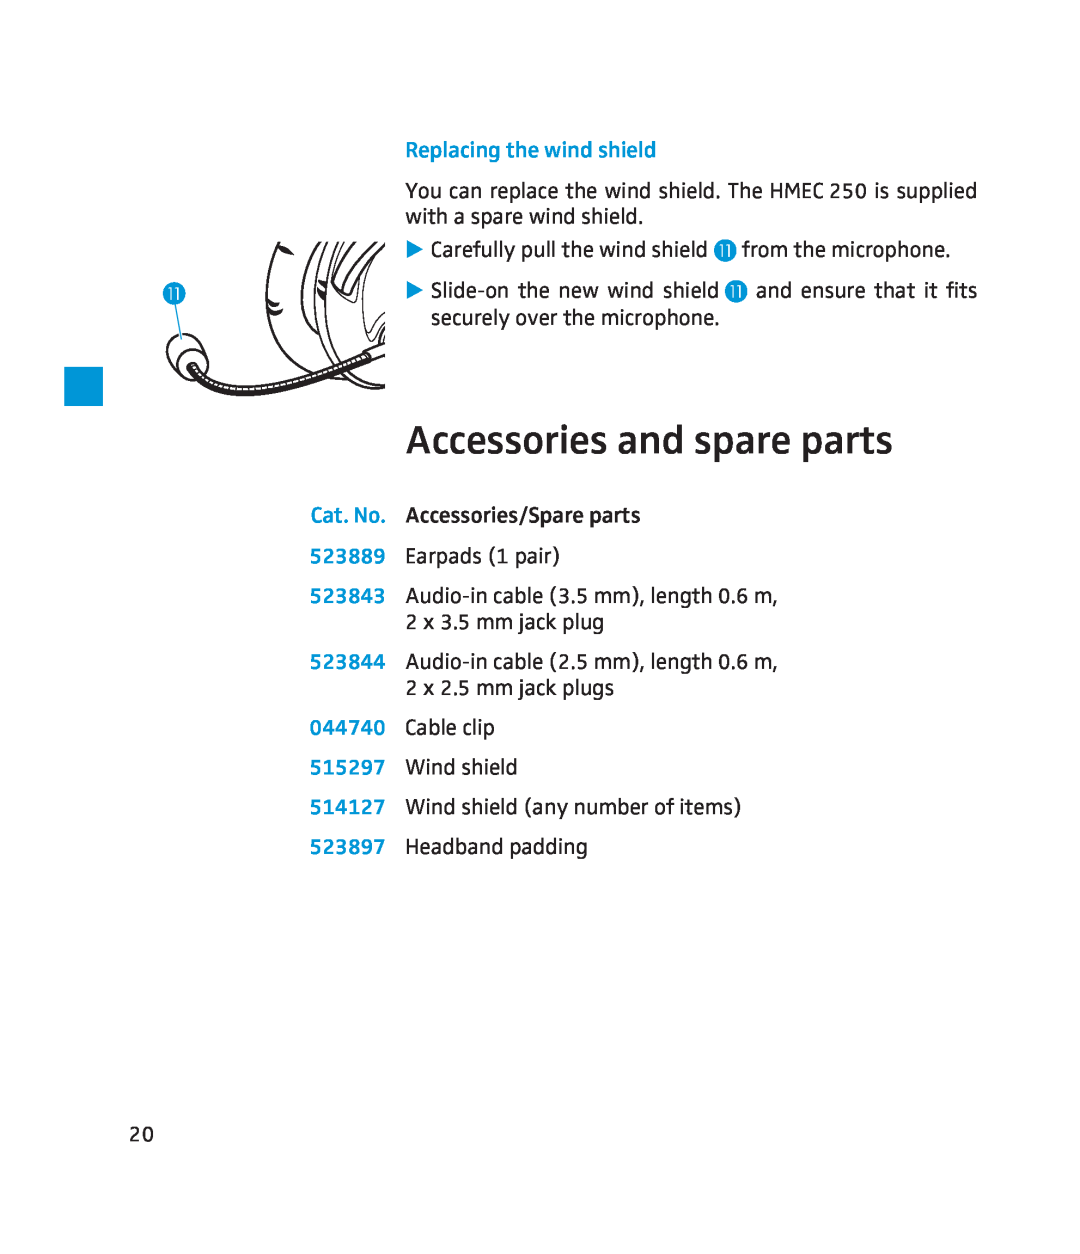 Sennheiser 250 instruction manual Accessories and spare parts, Replacing the wind shield 